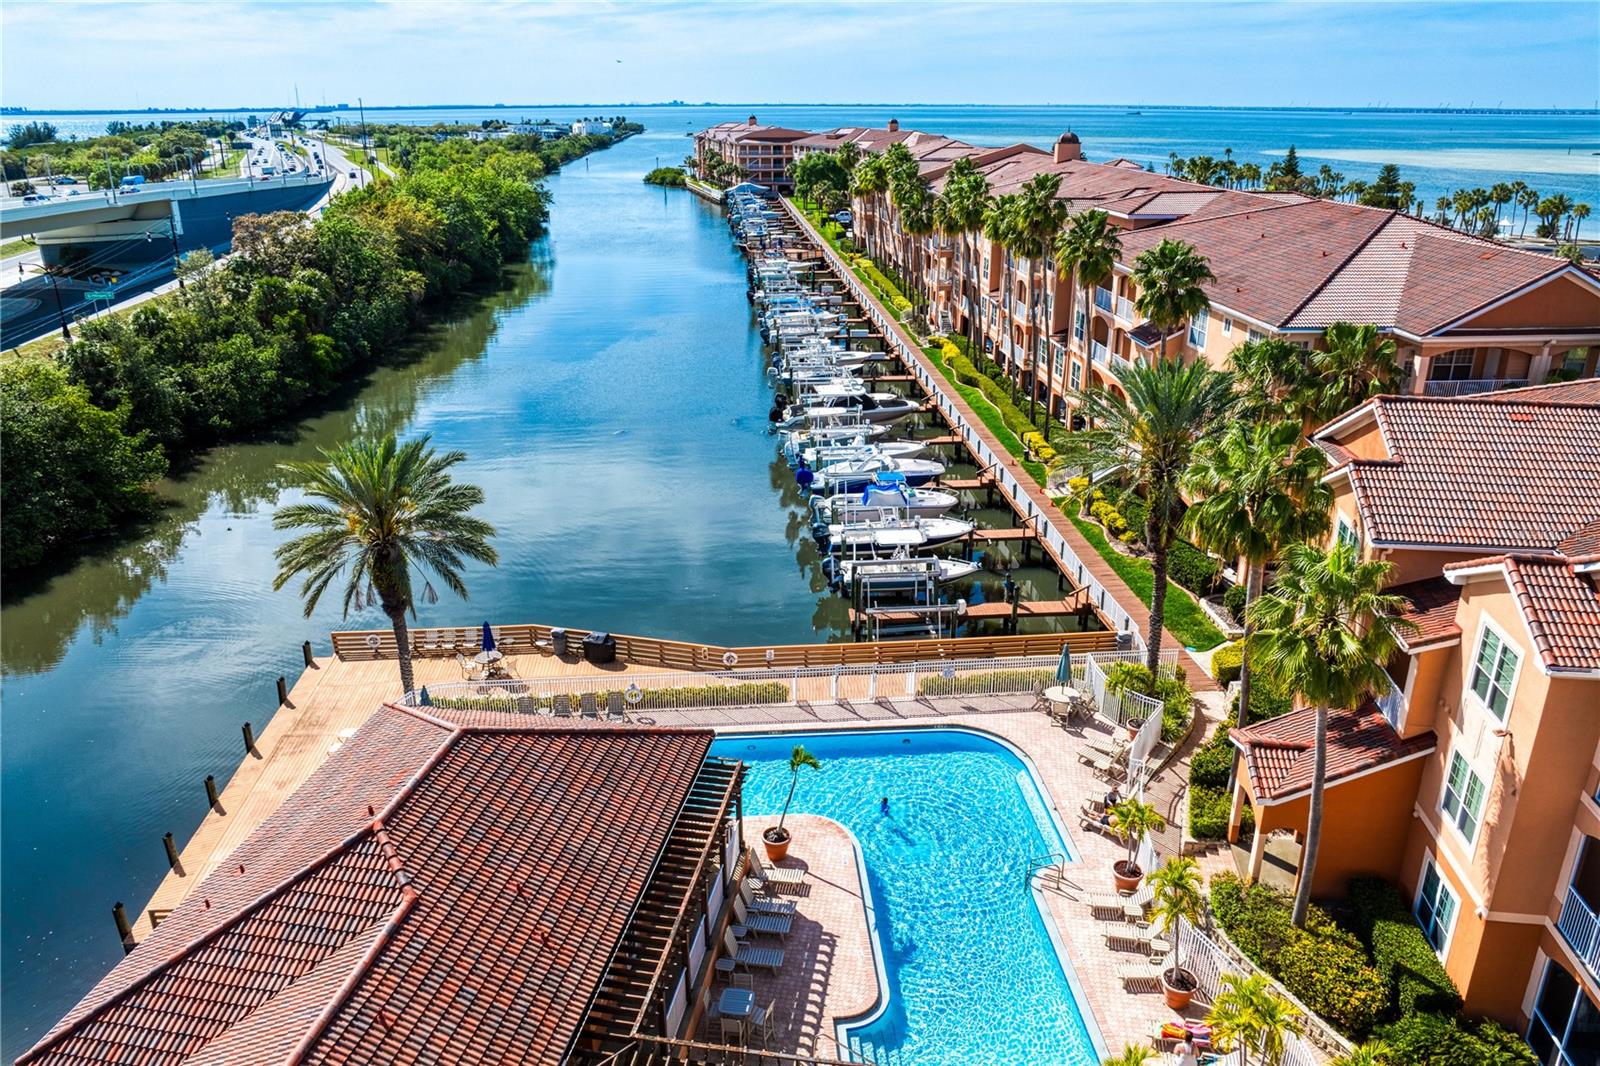 A pool with a view! Looking down the canal that takes you to Tampa Bay!